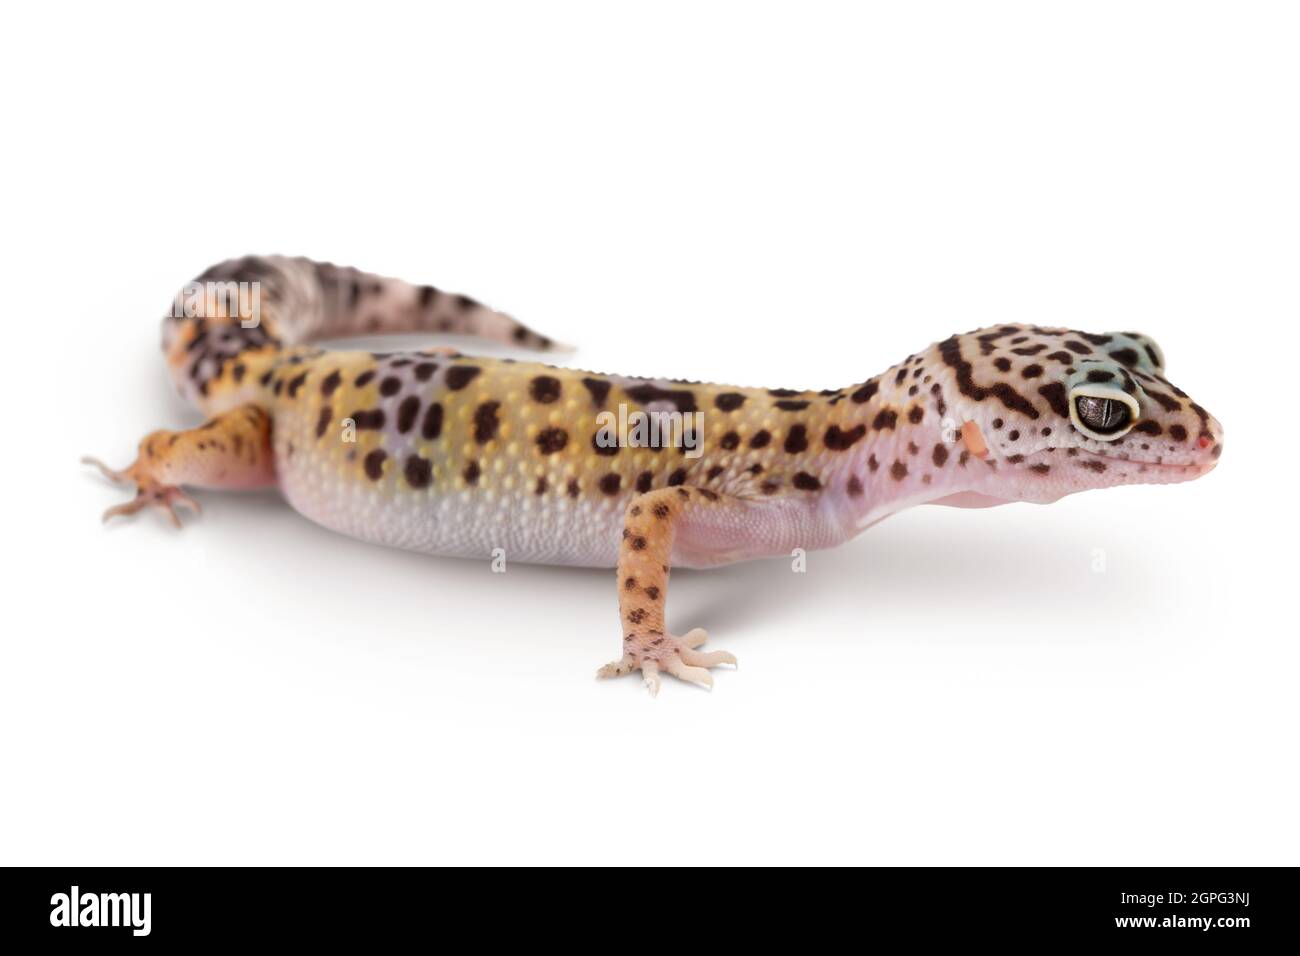 Leopard gecko or Eublepharis macularius isolated on white background with clipping path and full depth of field Stock Photo